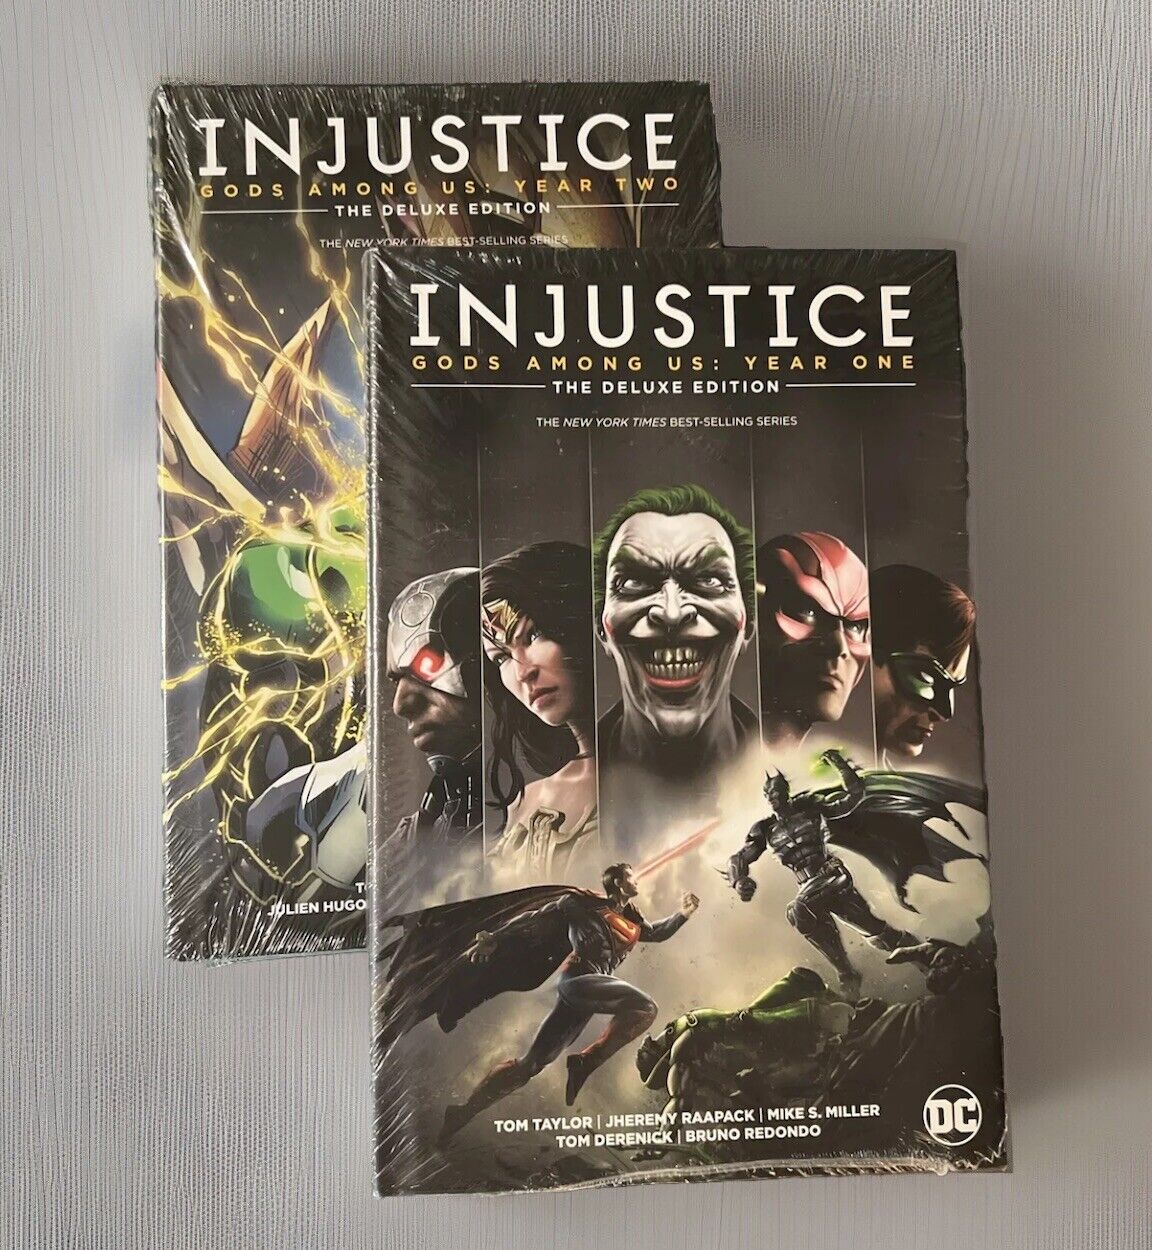 Injustice The Deluxe Edition - GODS AMONG US: YEAR ONE & TWO - HC - New Sealed